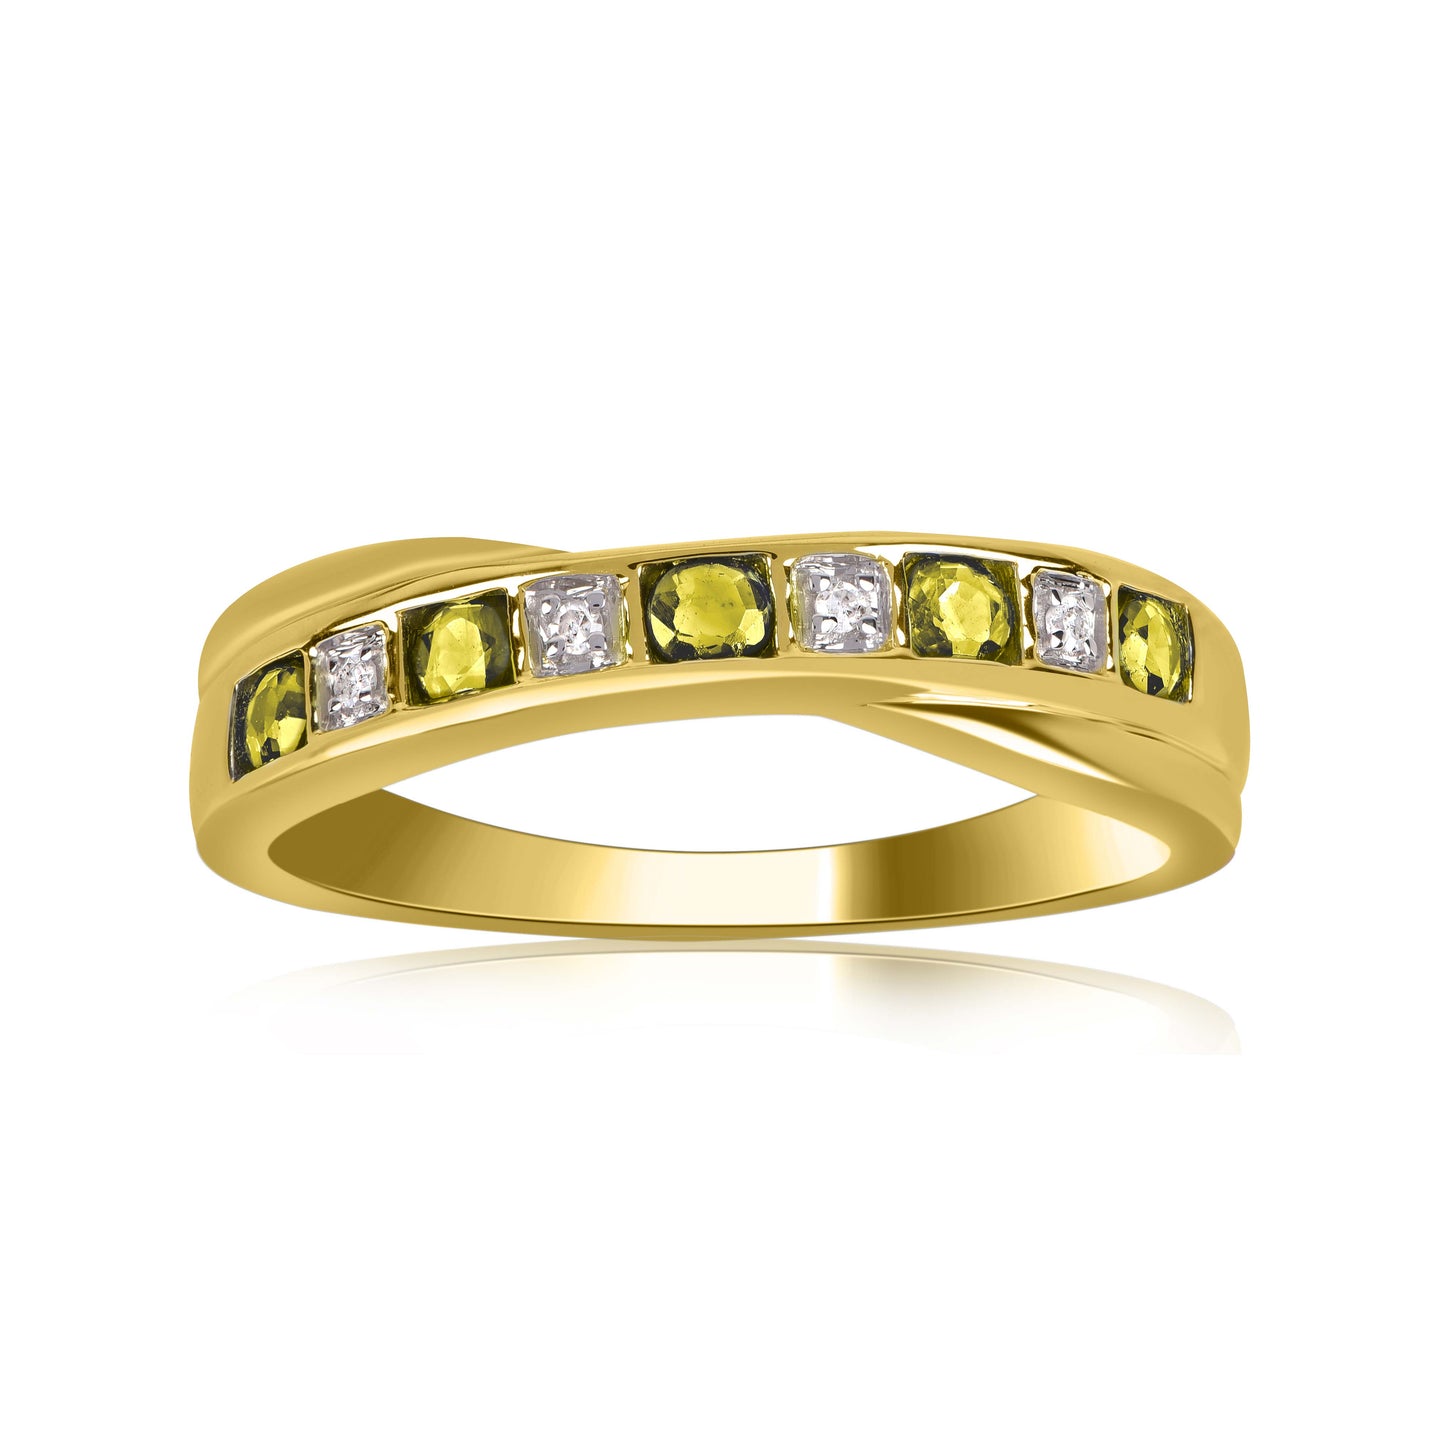 Diamond and Yellow Sapphire Criss-cross Ring in 10K Gold